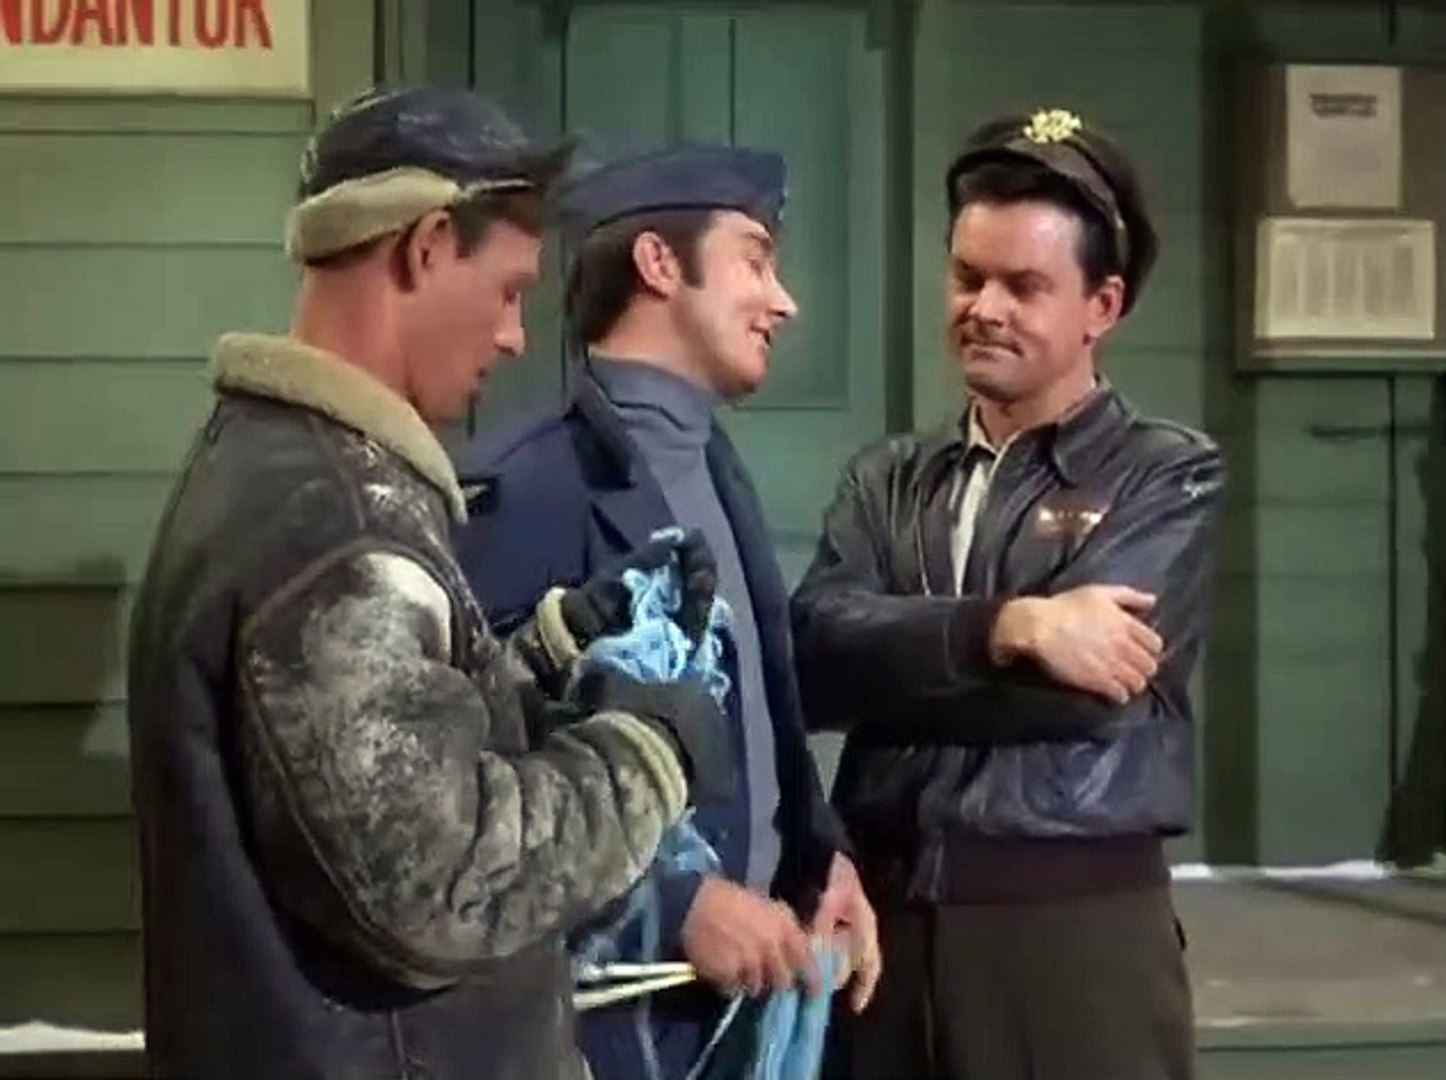 ledig stilling ugunstige Creep PART 3 Cupid] It'll be the cooler for every man who doesn't sparkle and  shine!-Hogan's Heroes 1x30 - video Dailymotion